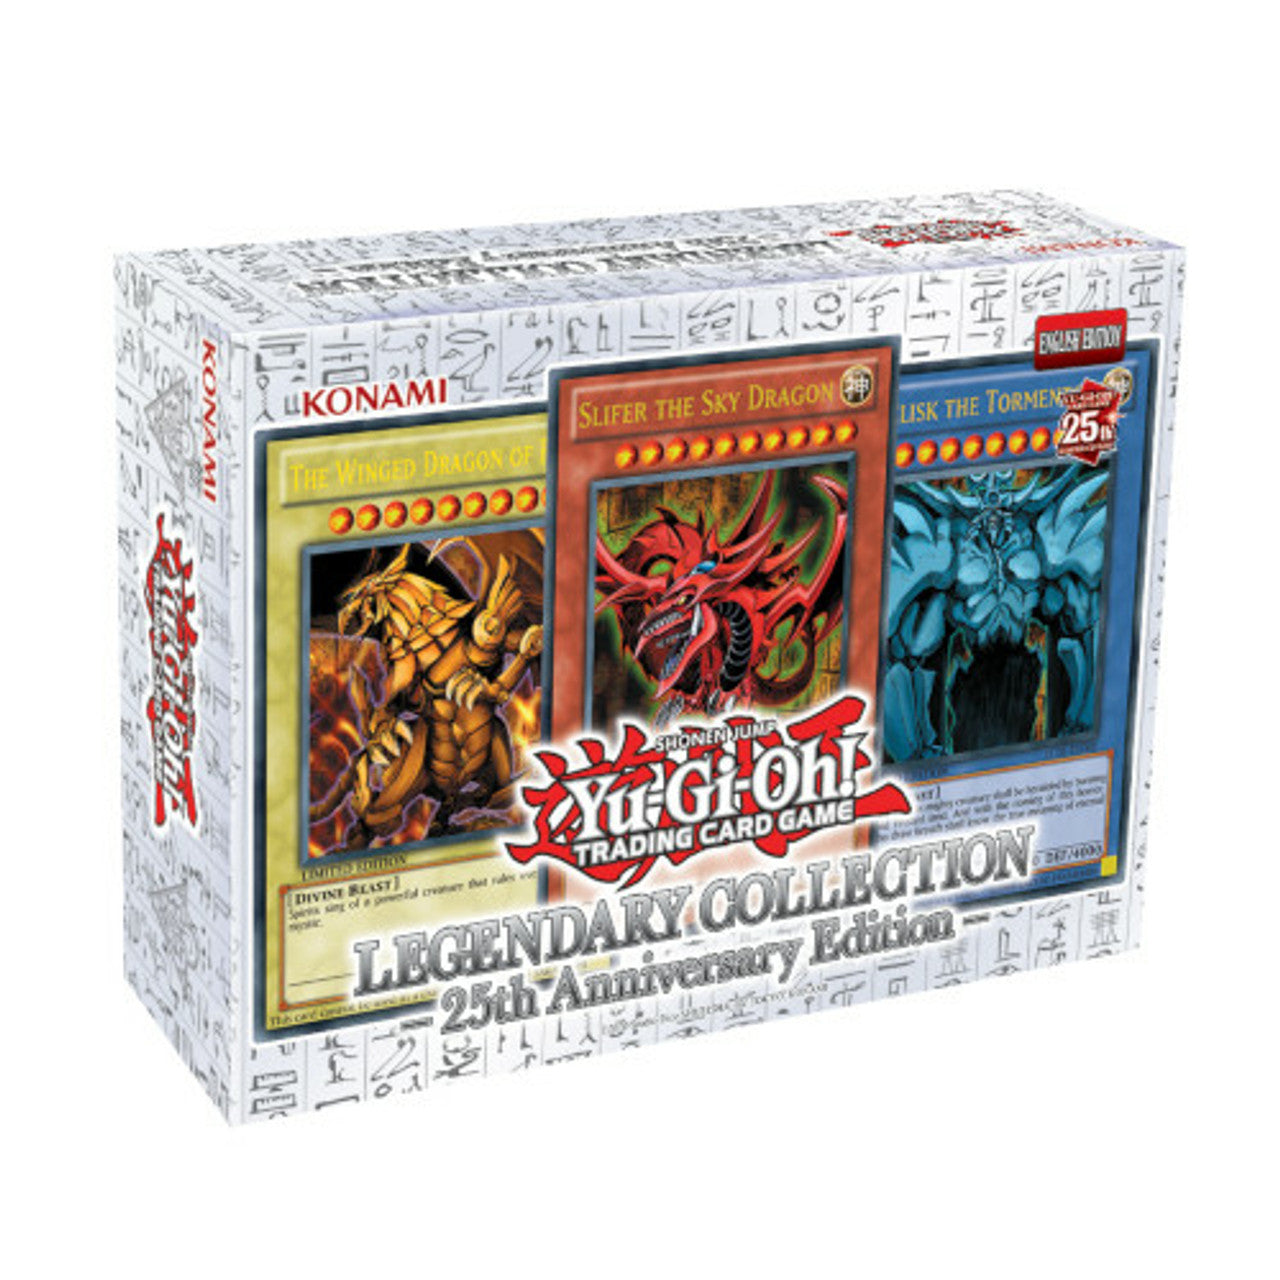 Yugioh! Legendary Collection - 25th Anniversary Edition - English Edition